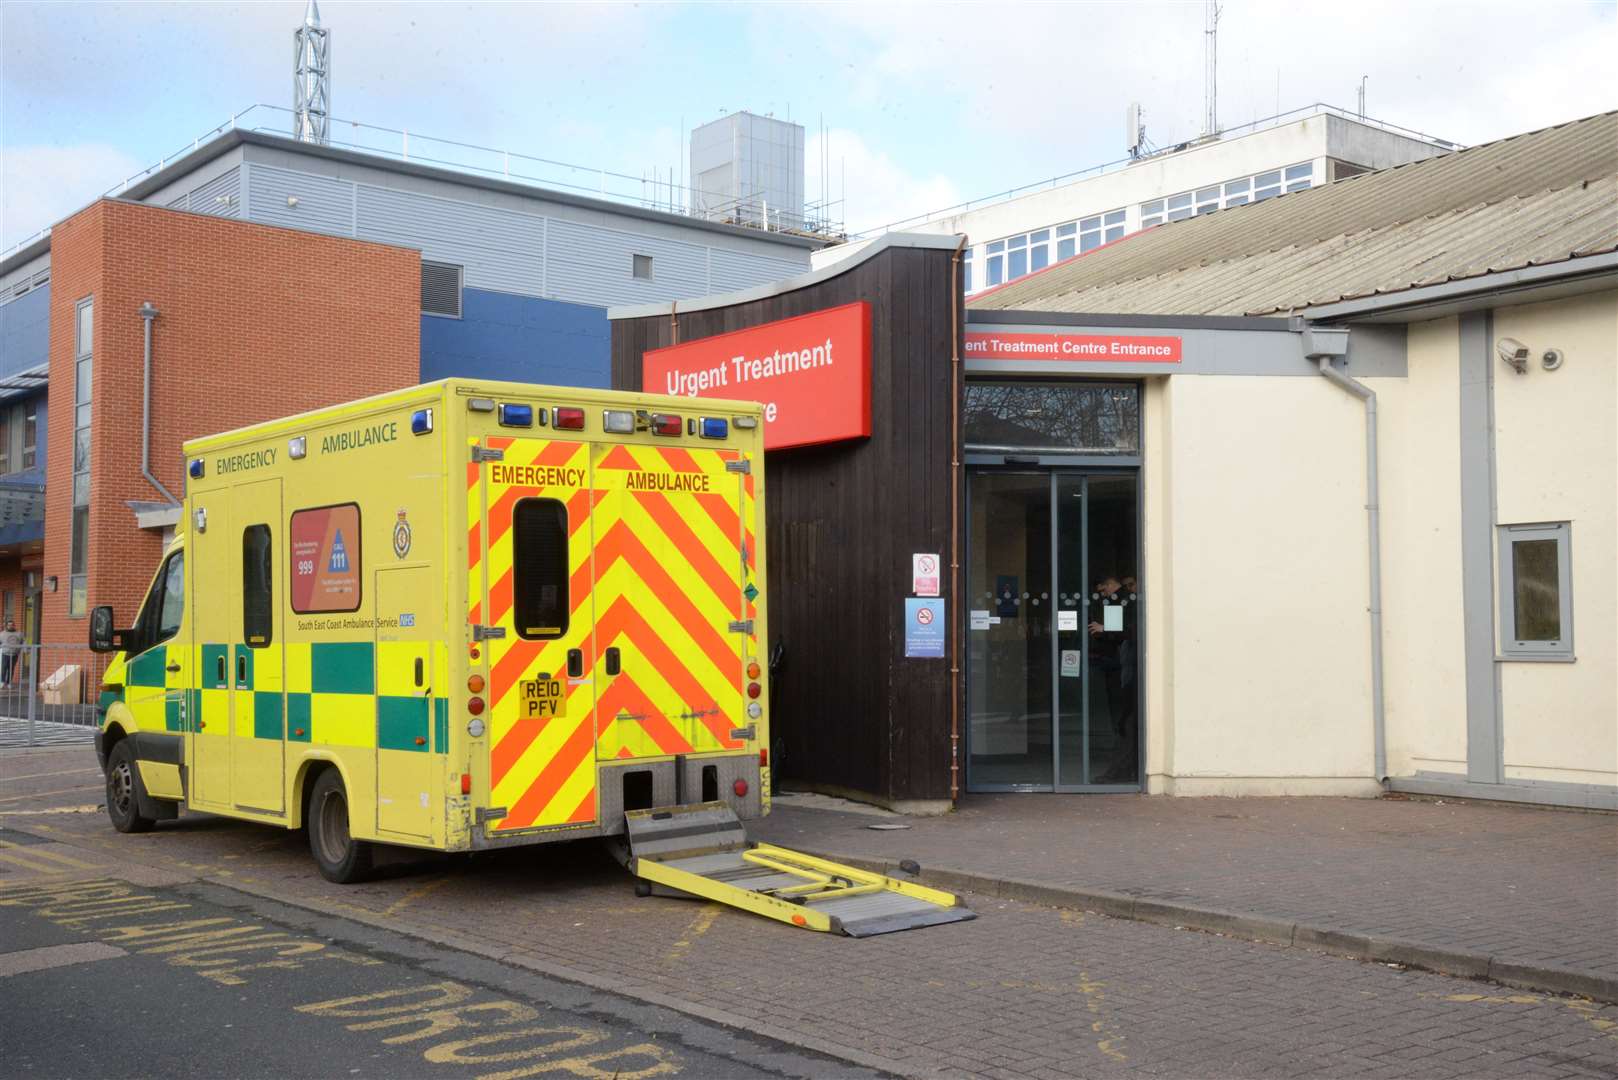 She was taken to be treated at Medway Maritime Hospital